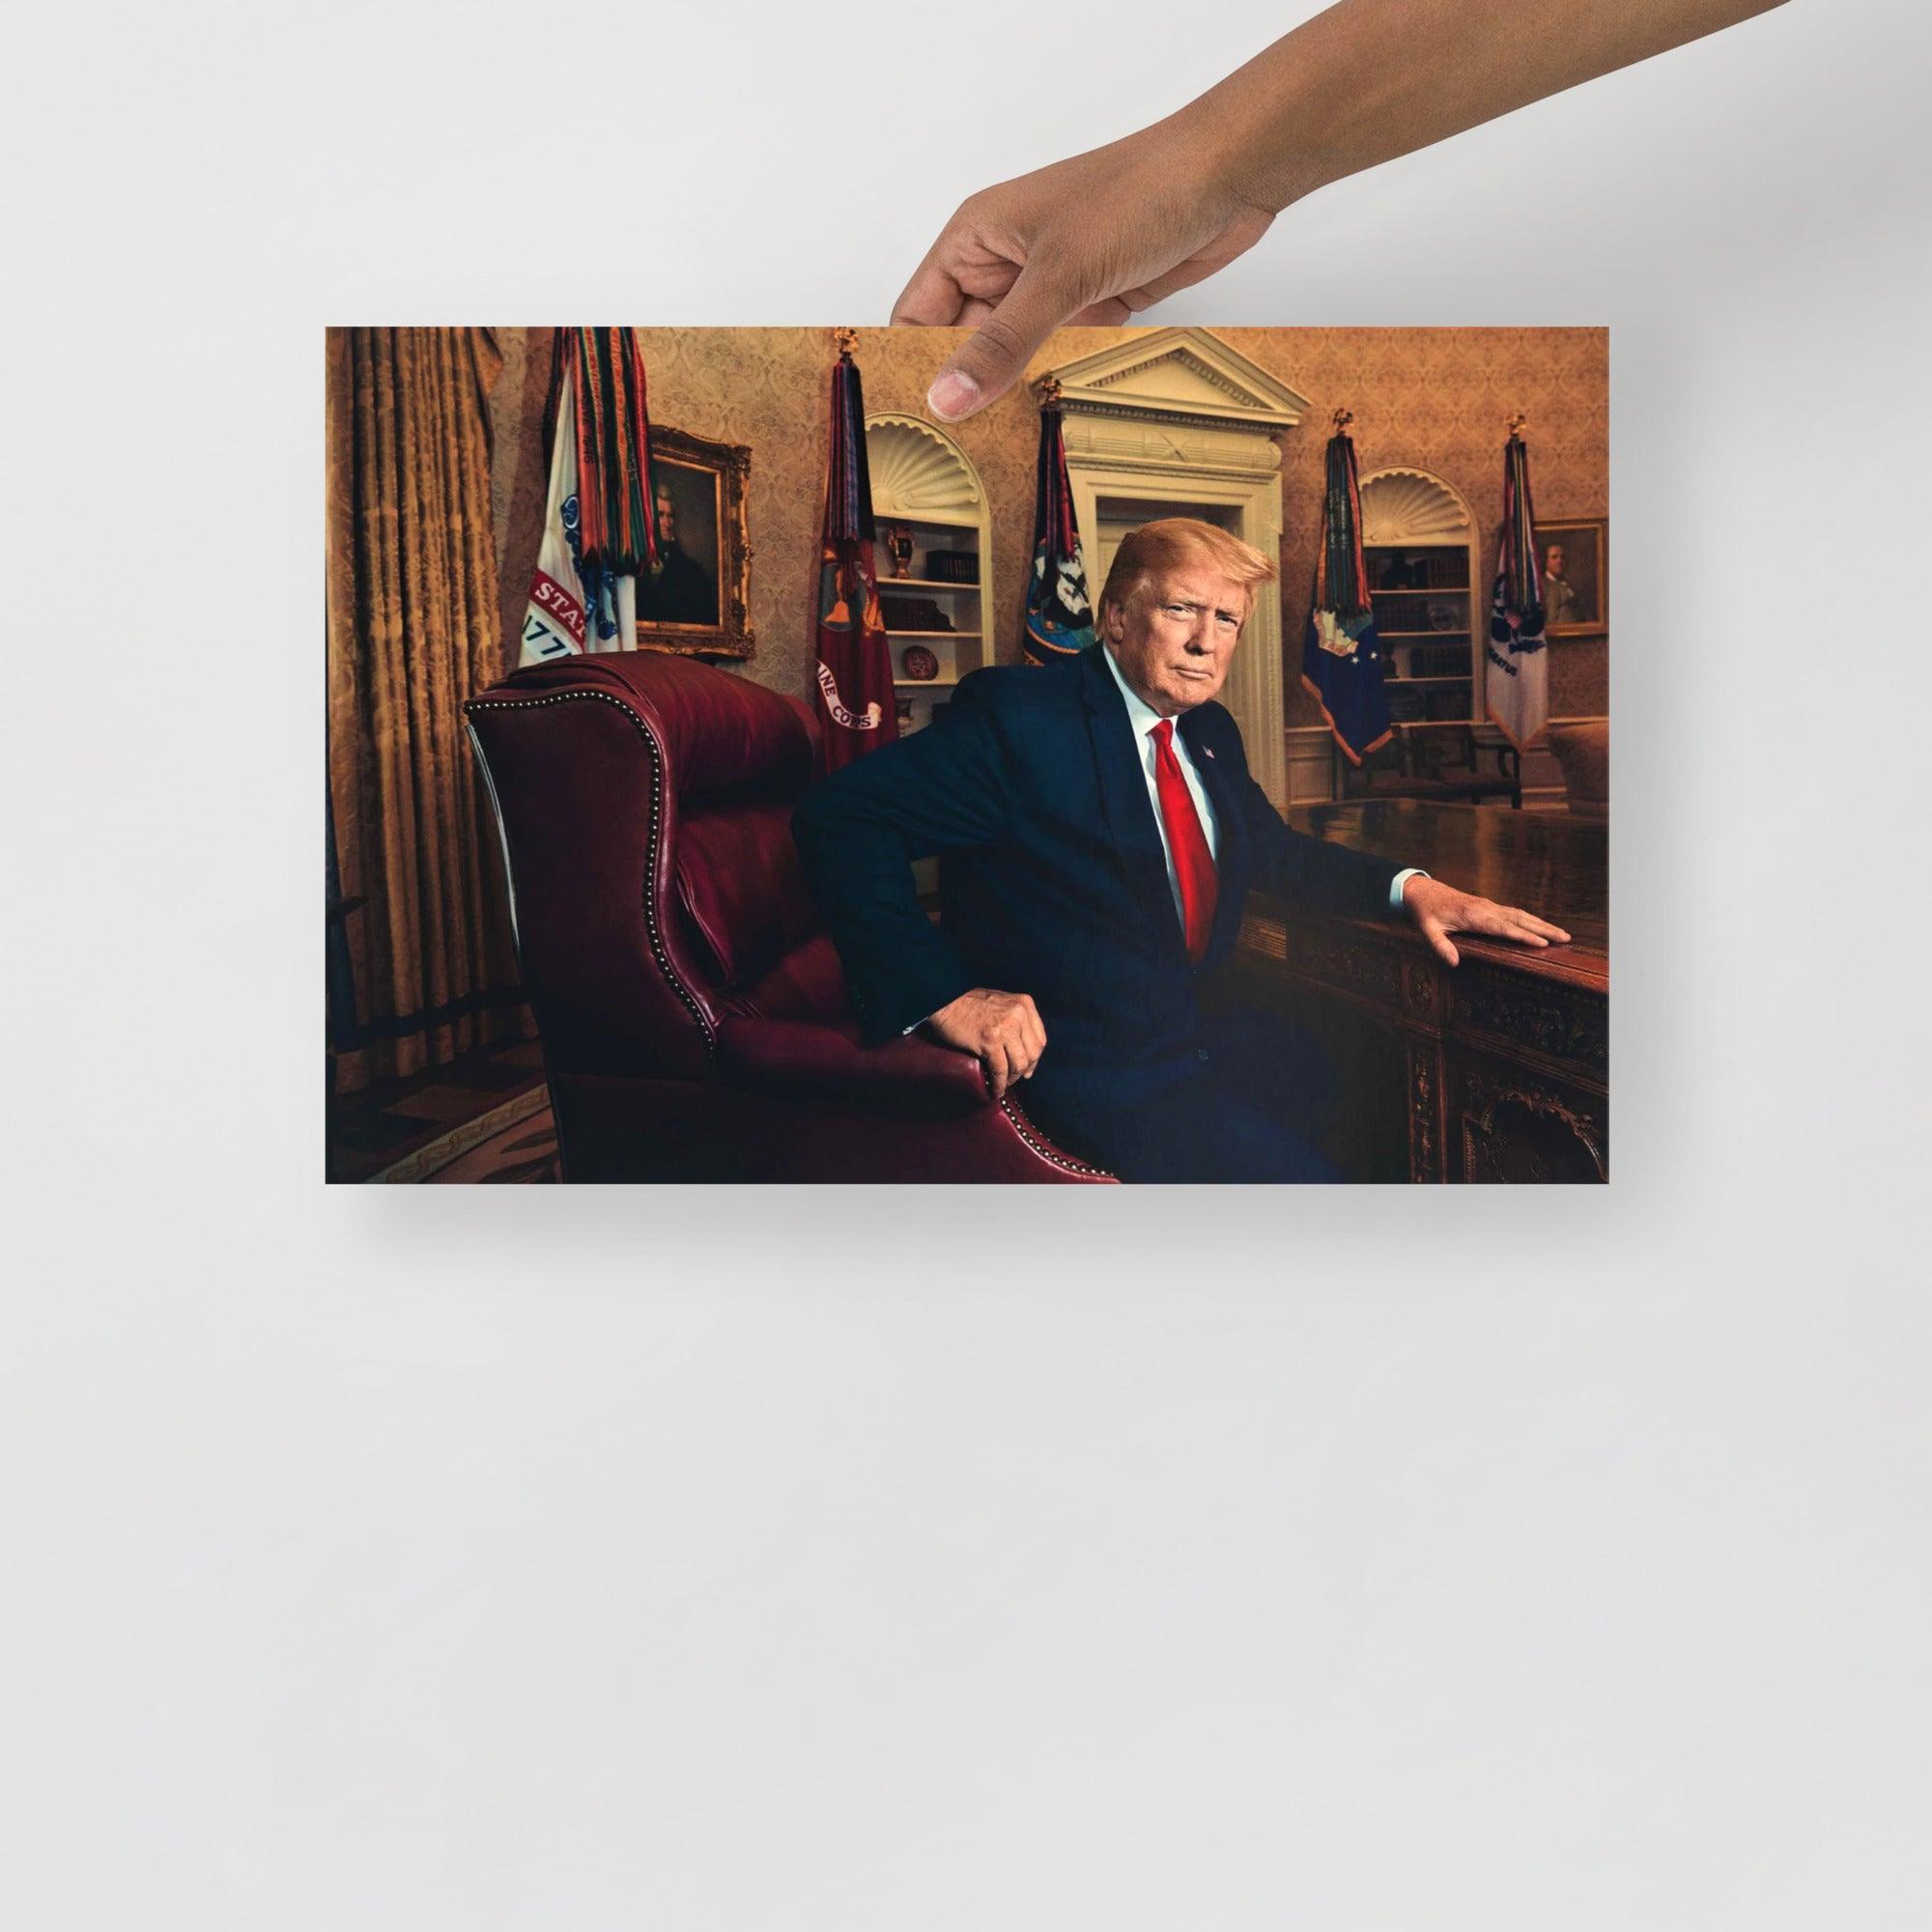 A Donald Trump at the Oval Office poster on a plain backdrop in size 12x18”.